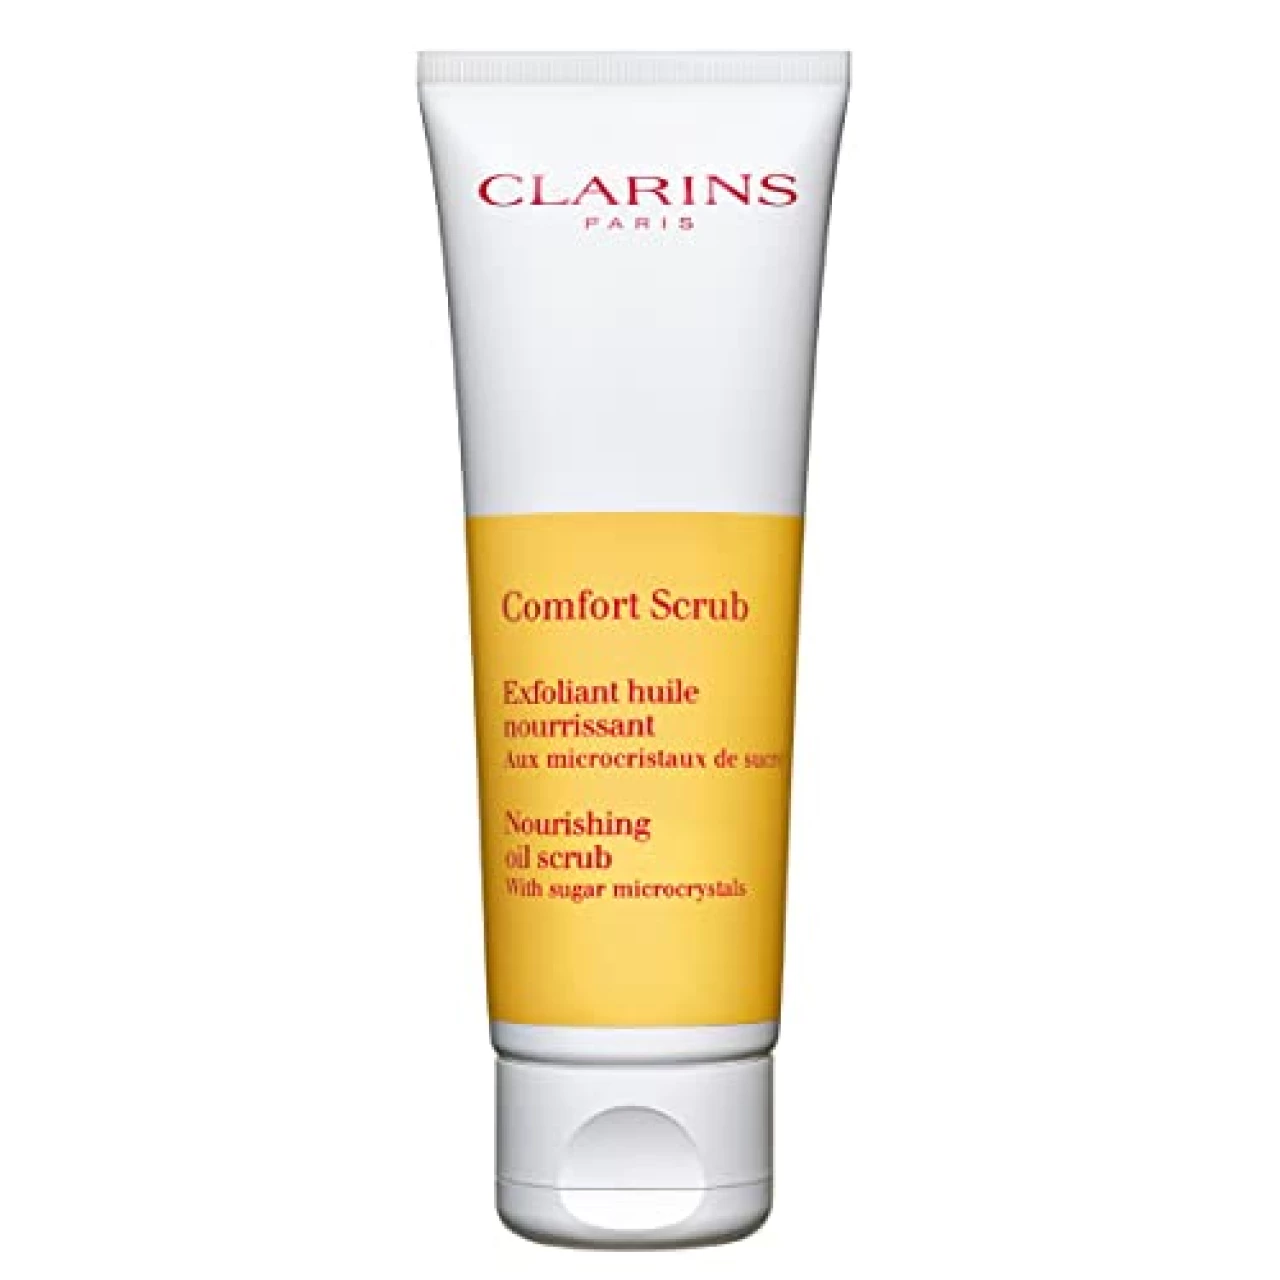 Clarins Comfort Scrub | Award-Winning | Nourishing, Oil-Infused Face Scrub With Sugar Microcrystals | Gently Exfoliates and Soothes | Paraben-Free | SLS-Free | Mineral Oil Free | Normal To Dry Skin